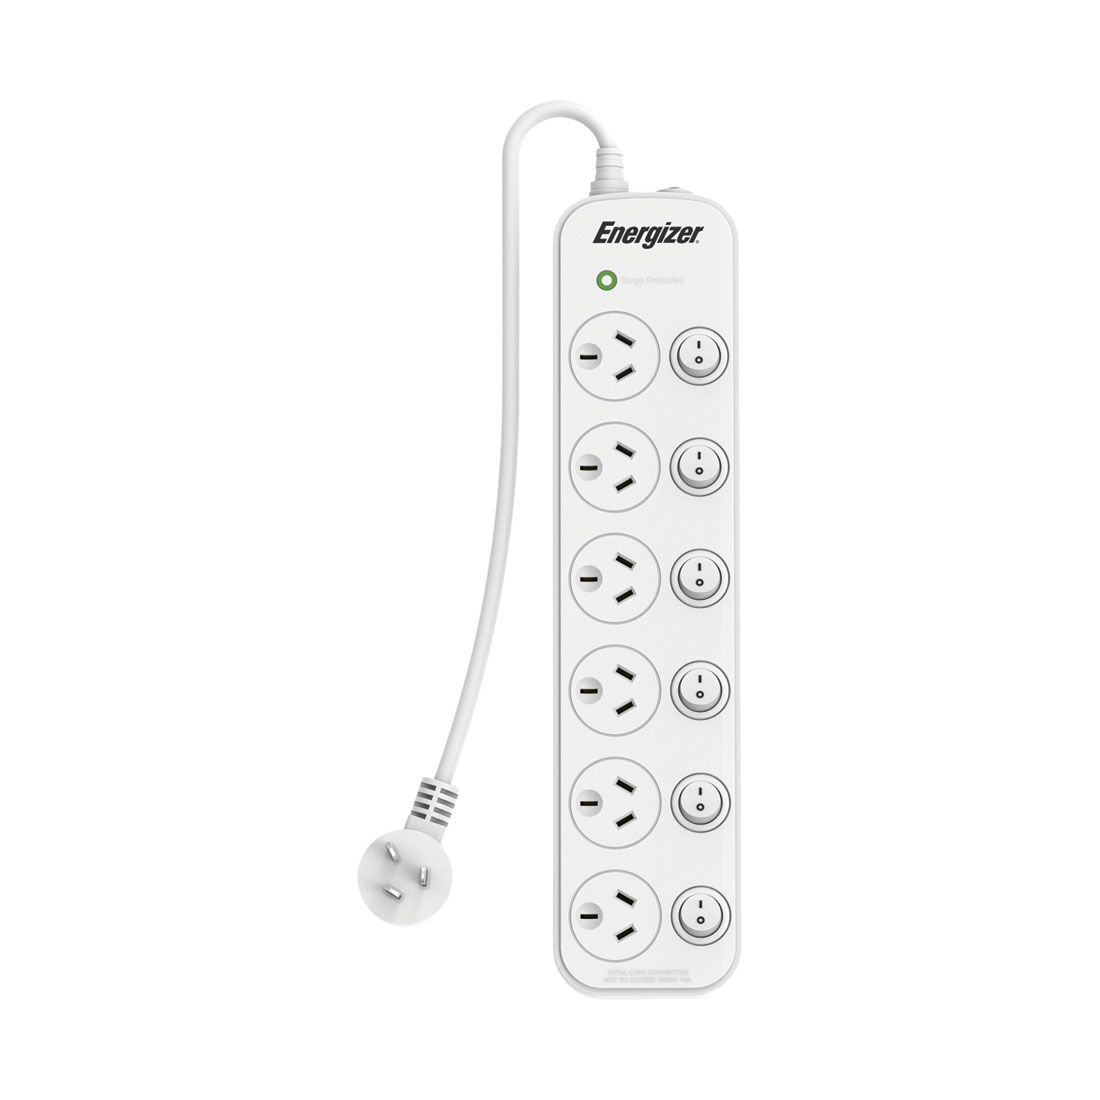 Energizer 6 Outlet Powerboard Surge Protected, , scaau_hi-res